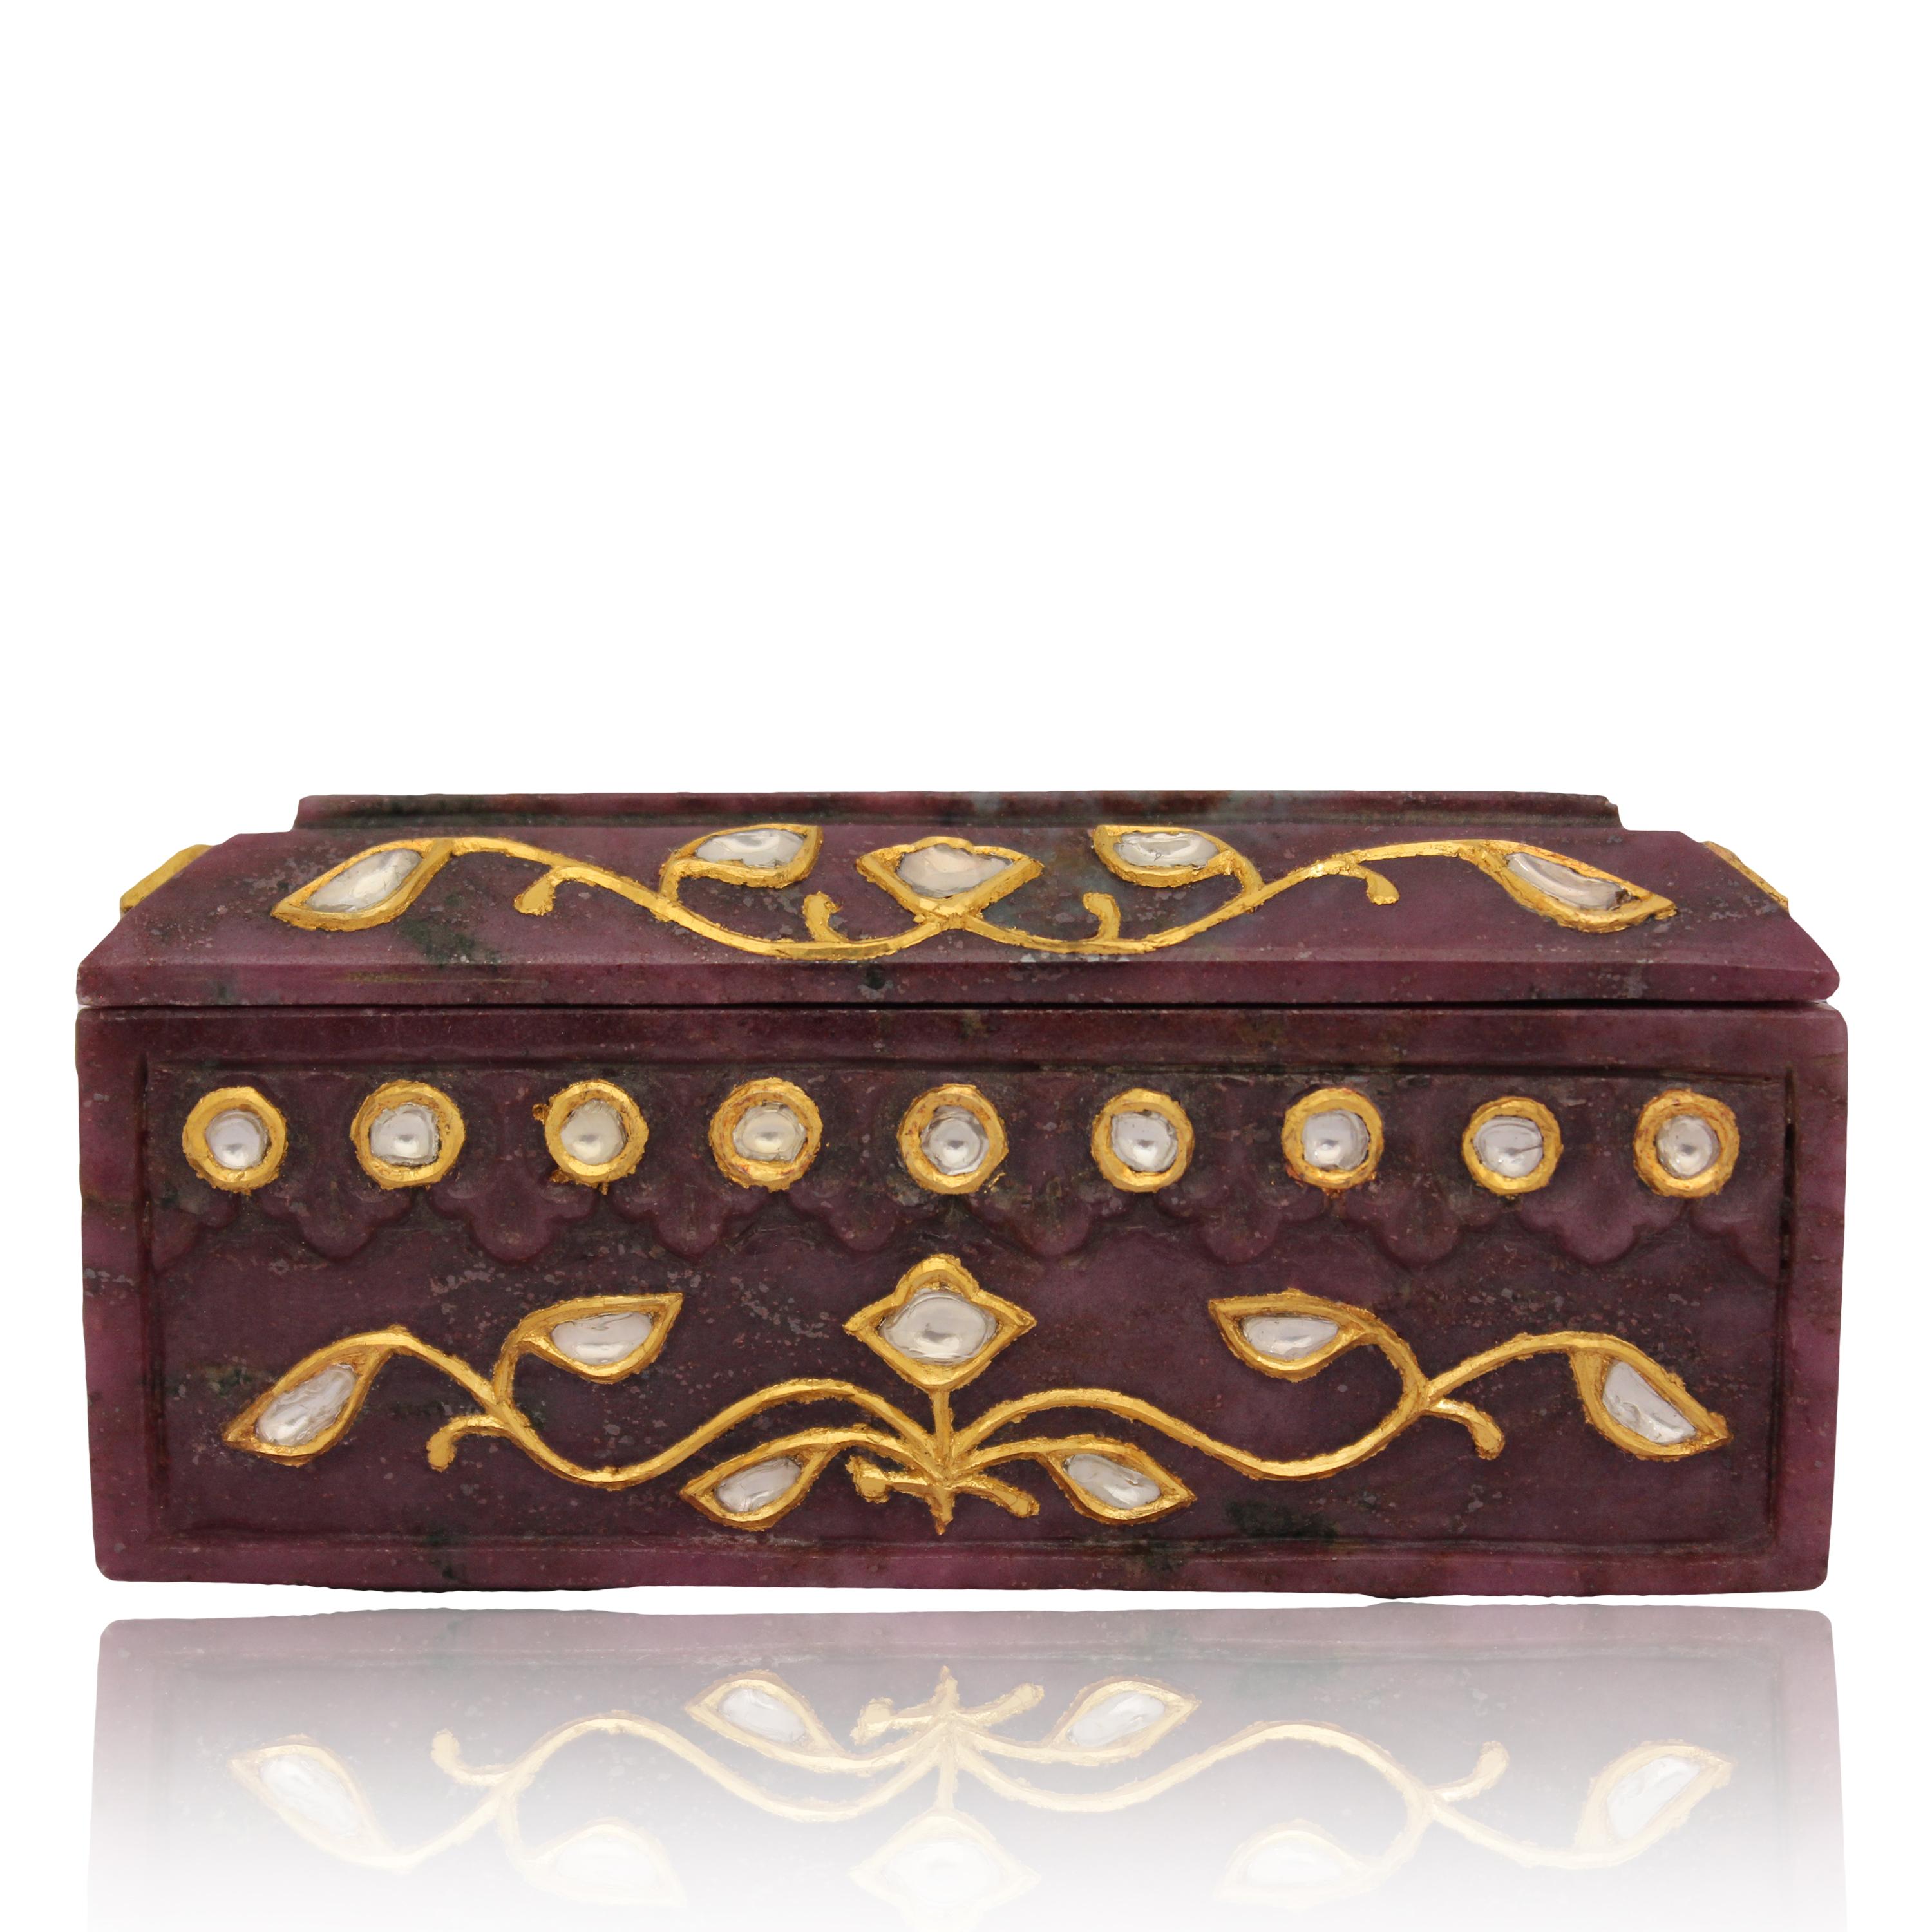 Natural Ruby box carved from one piece standing on four bracket feet, the lid carved in form of tapered roofs of Indian buildings with a flower at the centre inlaid with natural uncut diamond polkis. the box is encrusted in kundan technique on all 4